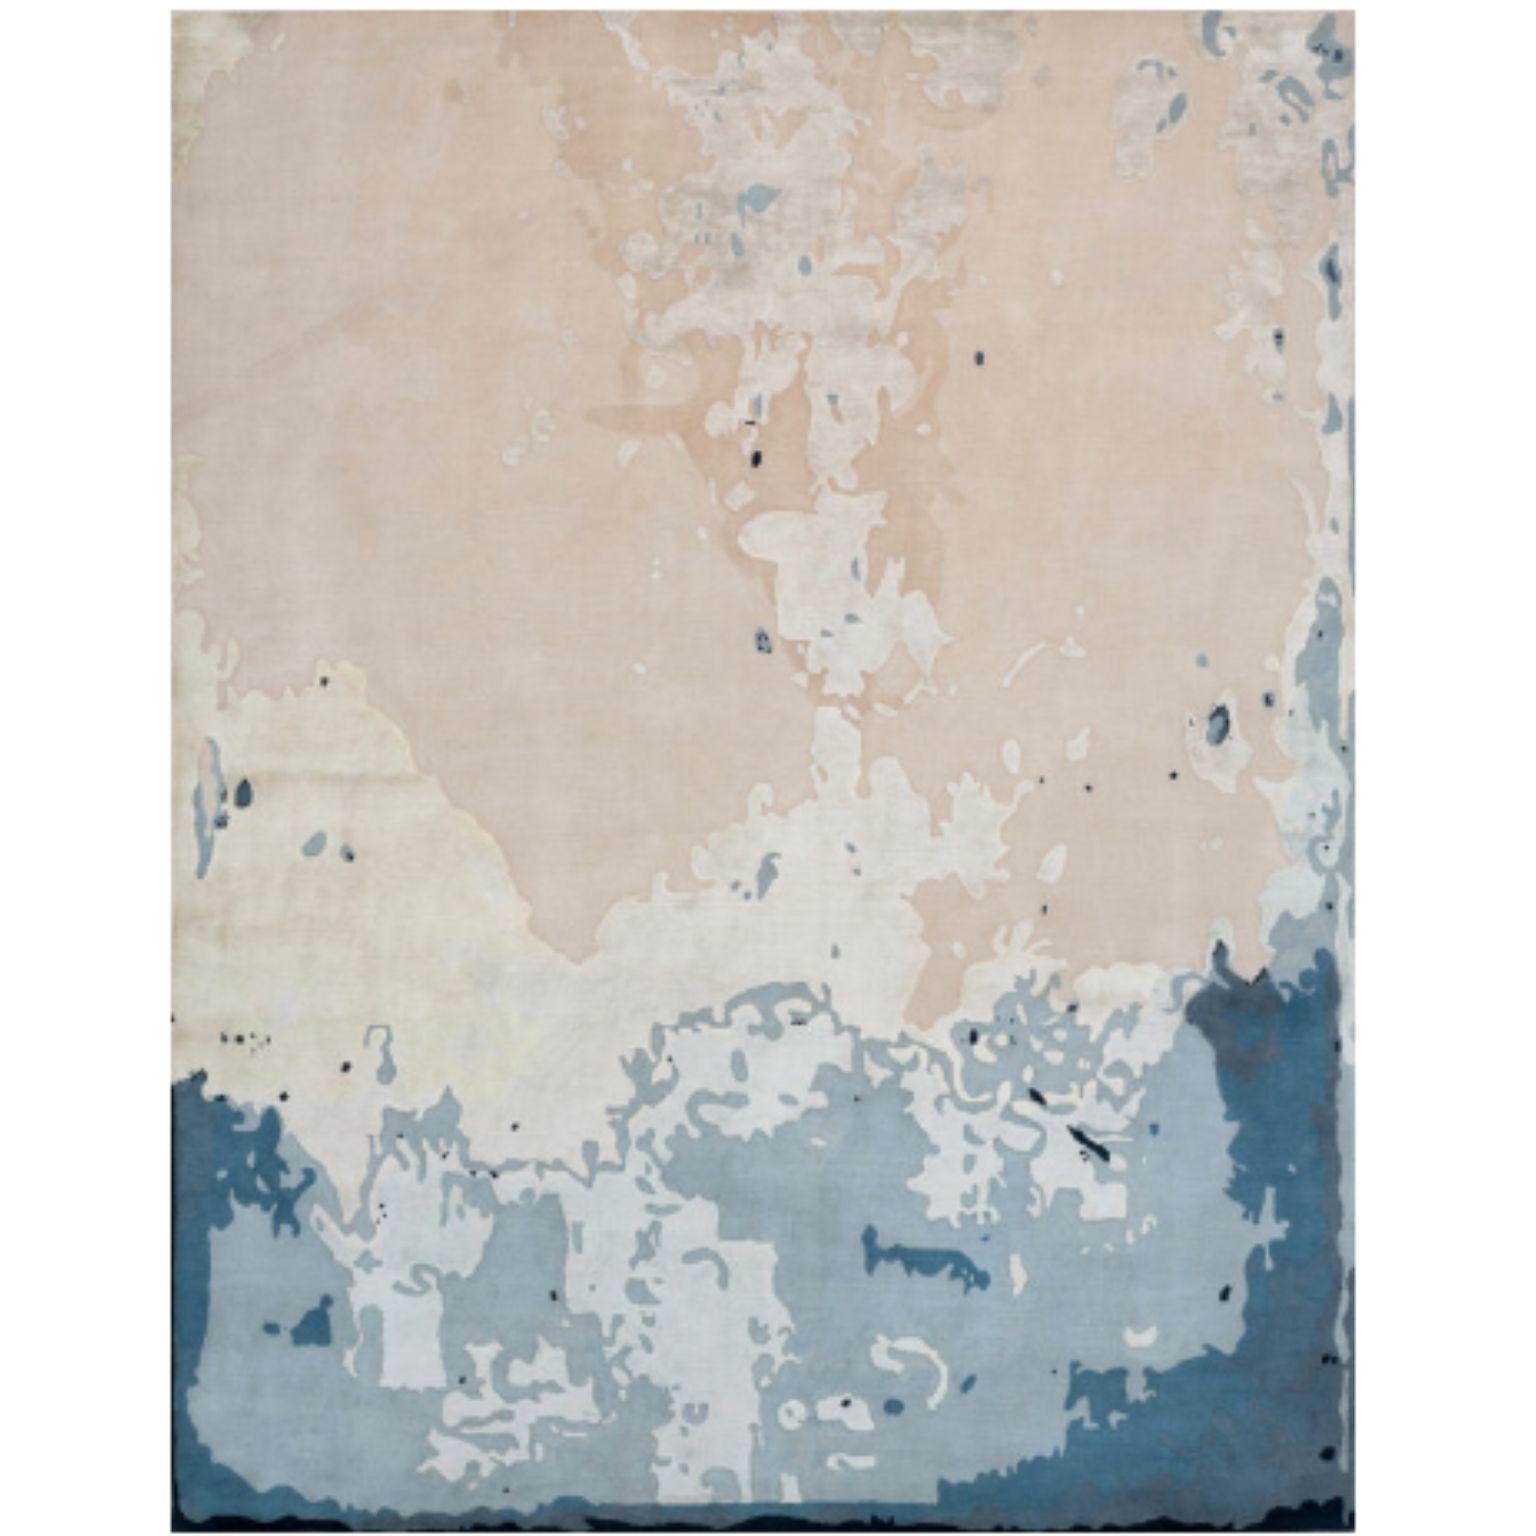 SAHARA 200 rug by Illulian.
Dimensions: D300 x H200 cm.
Materials: wool 50% , silk 50%.
Variations available and prices may vary according to materials and sizes.

Illulian, historic and prestigious rug company brand, internationally renowned